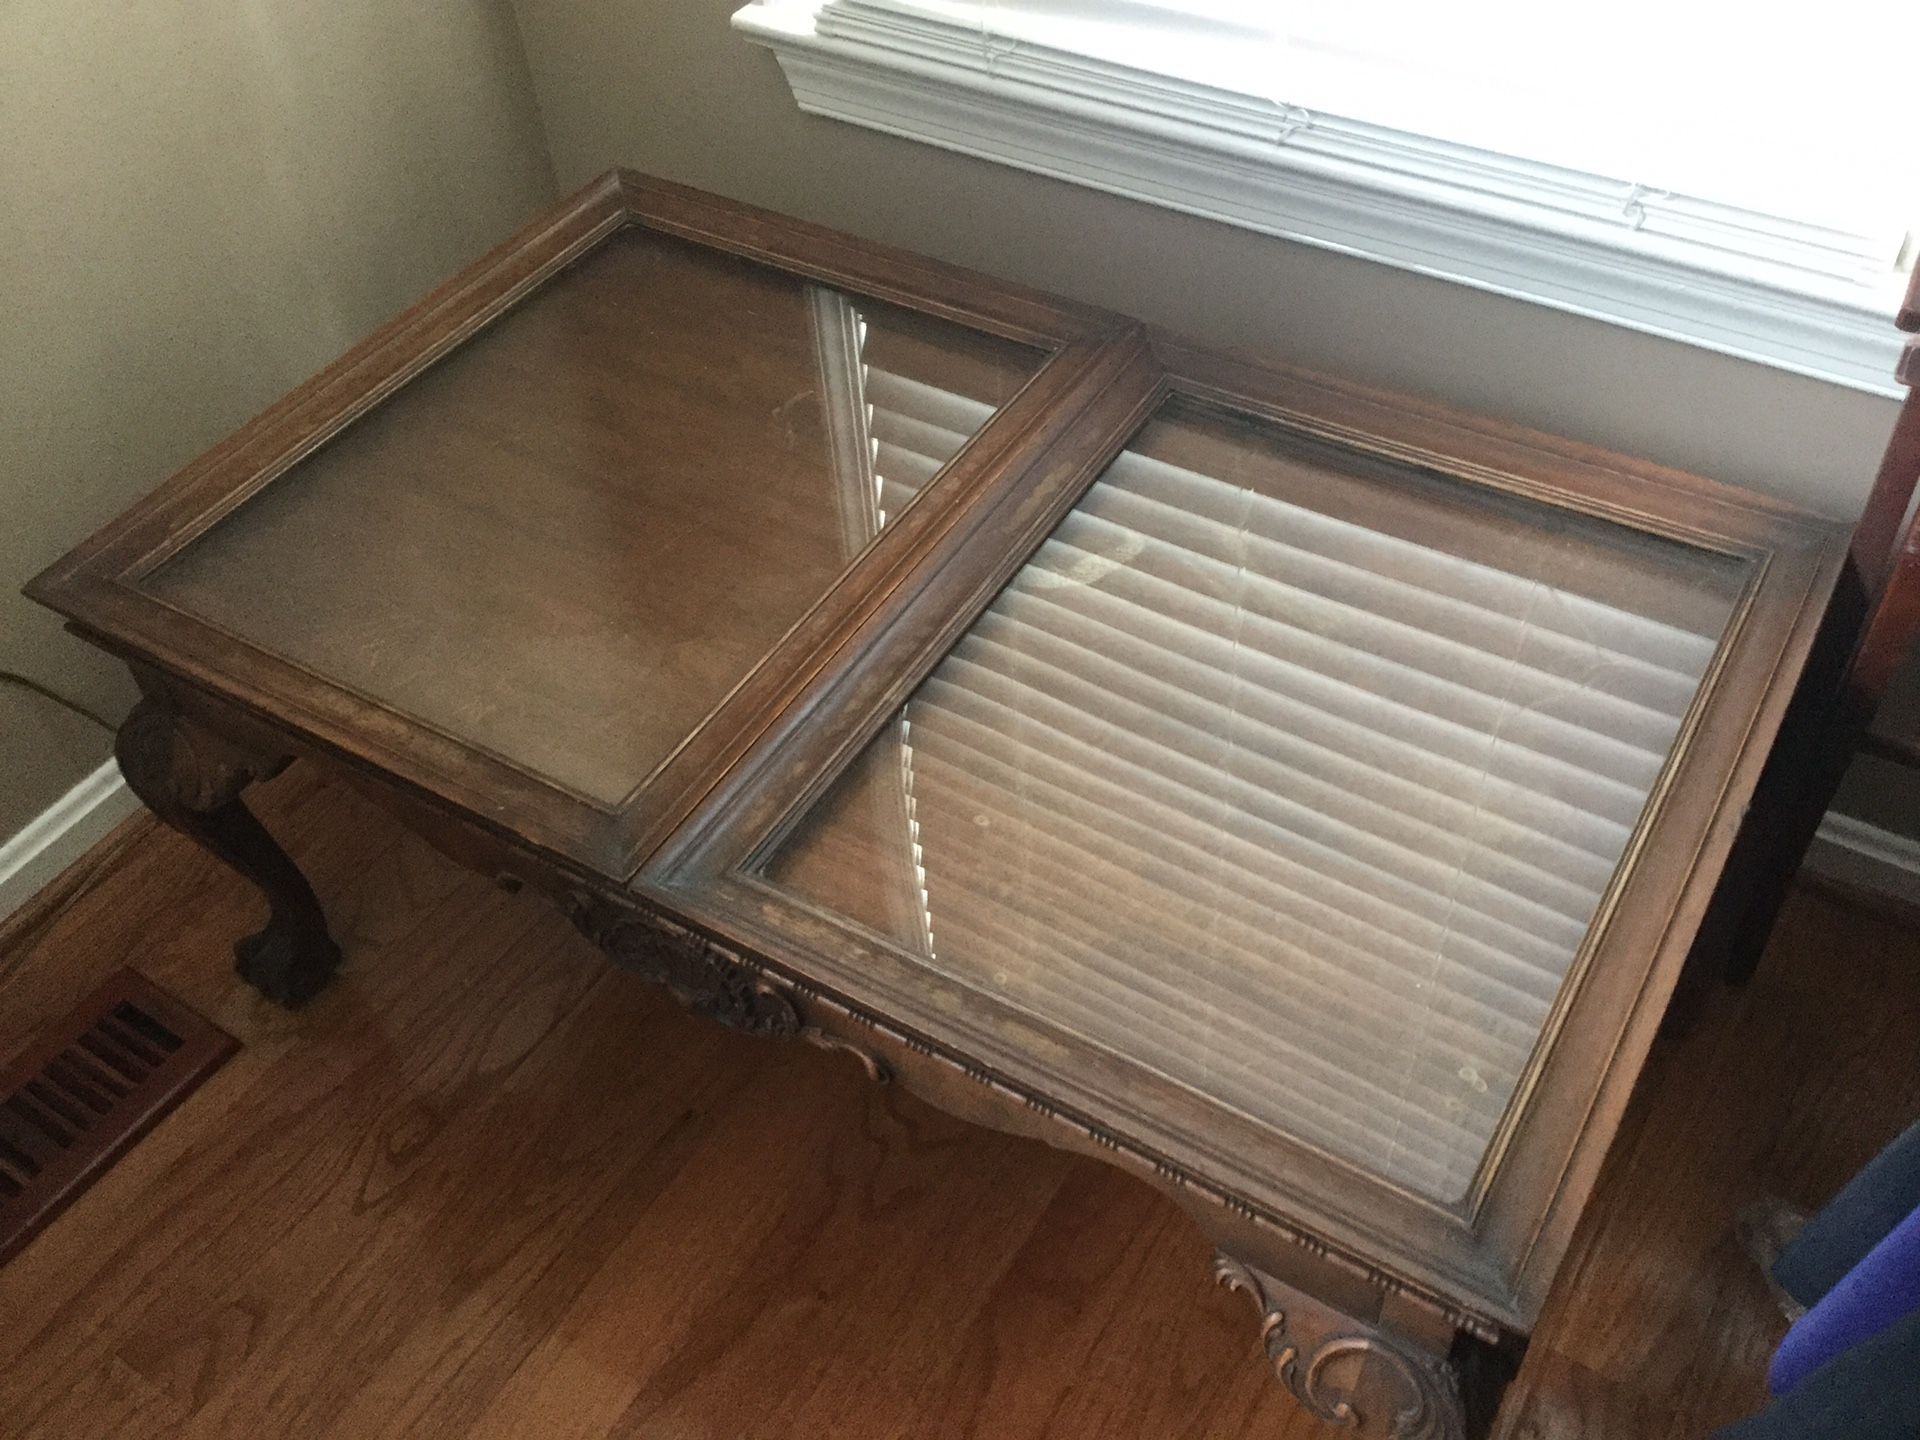 Antique Oak coffee table w 2 glass panels for shallow shadow box